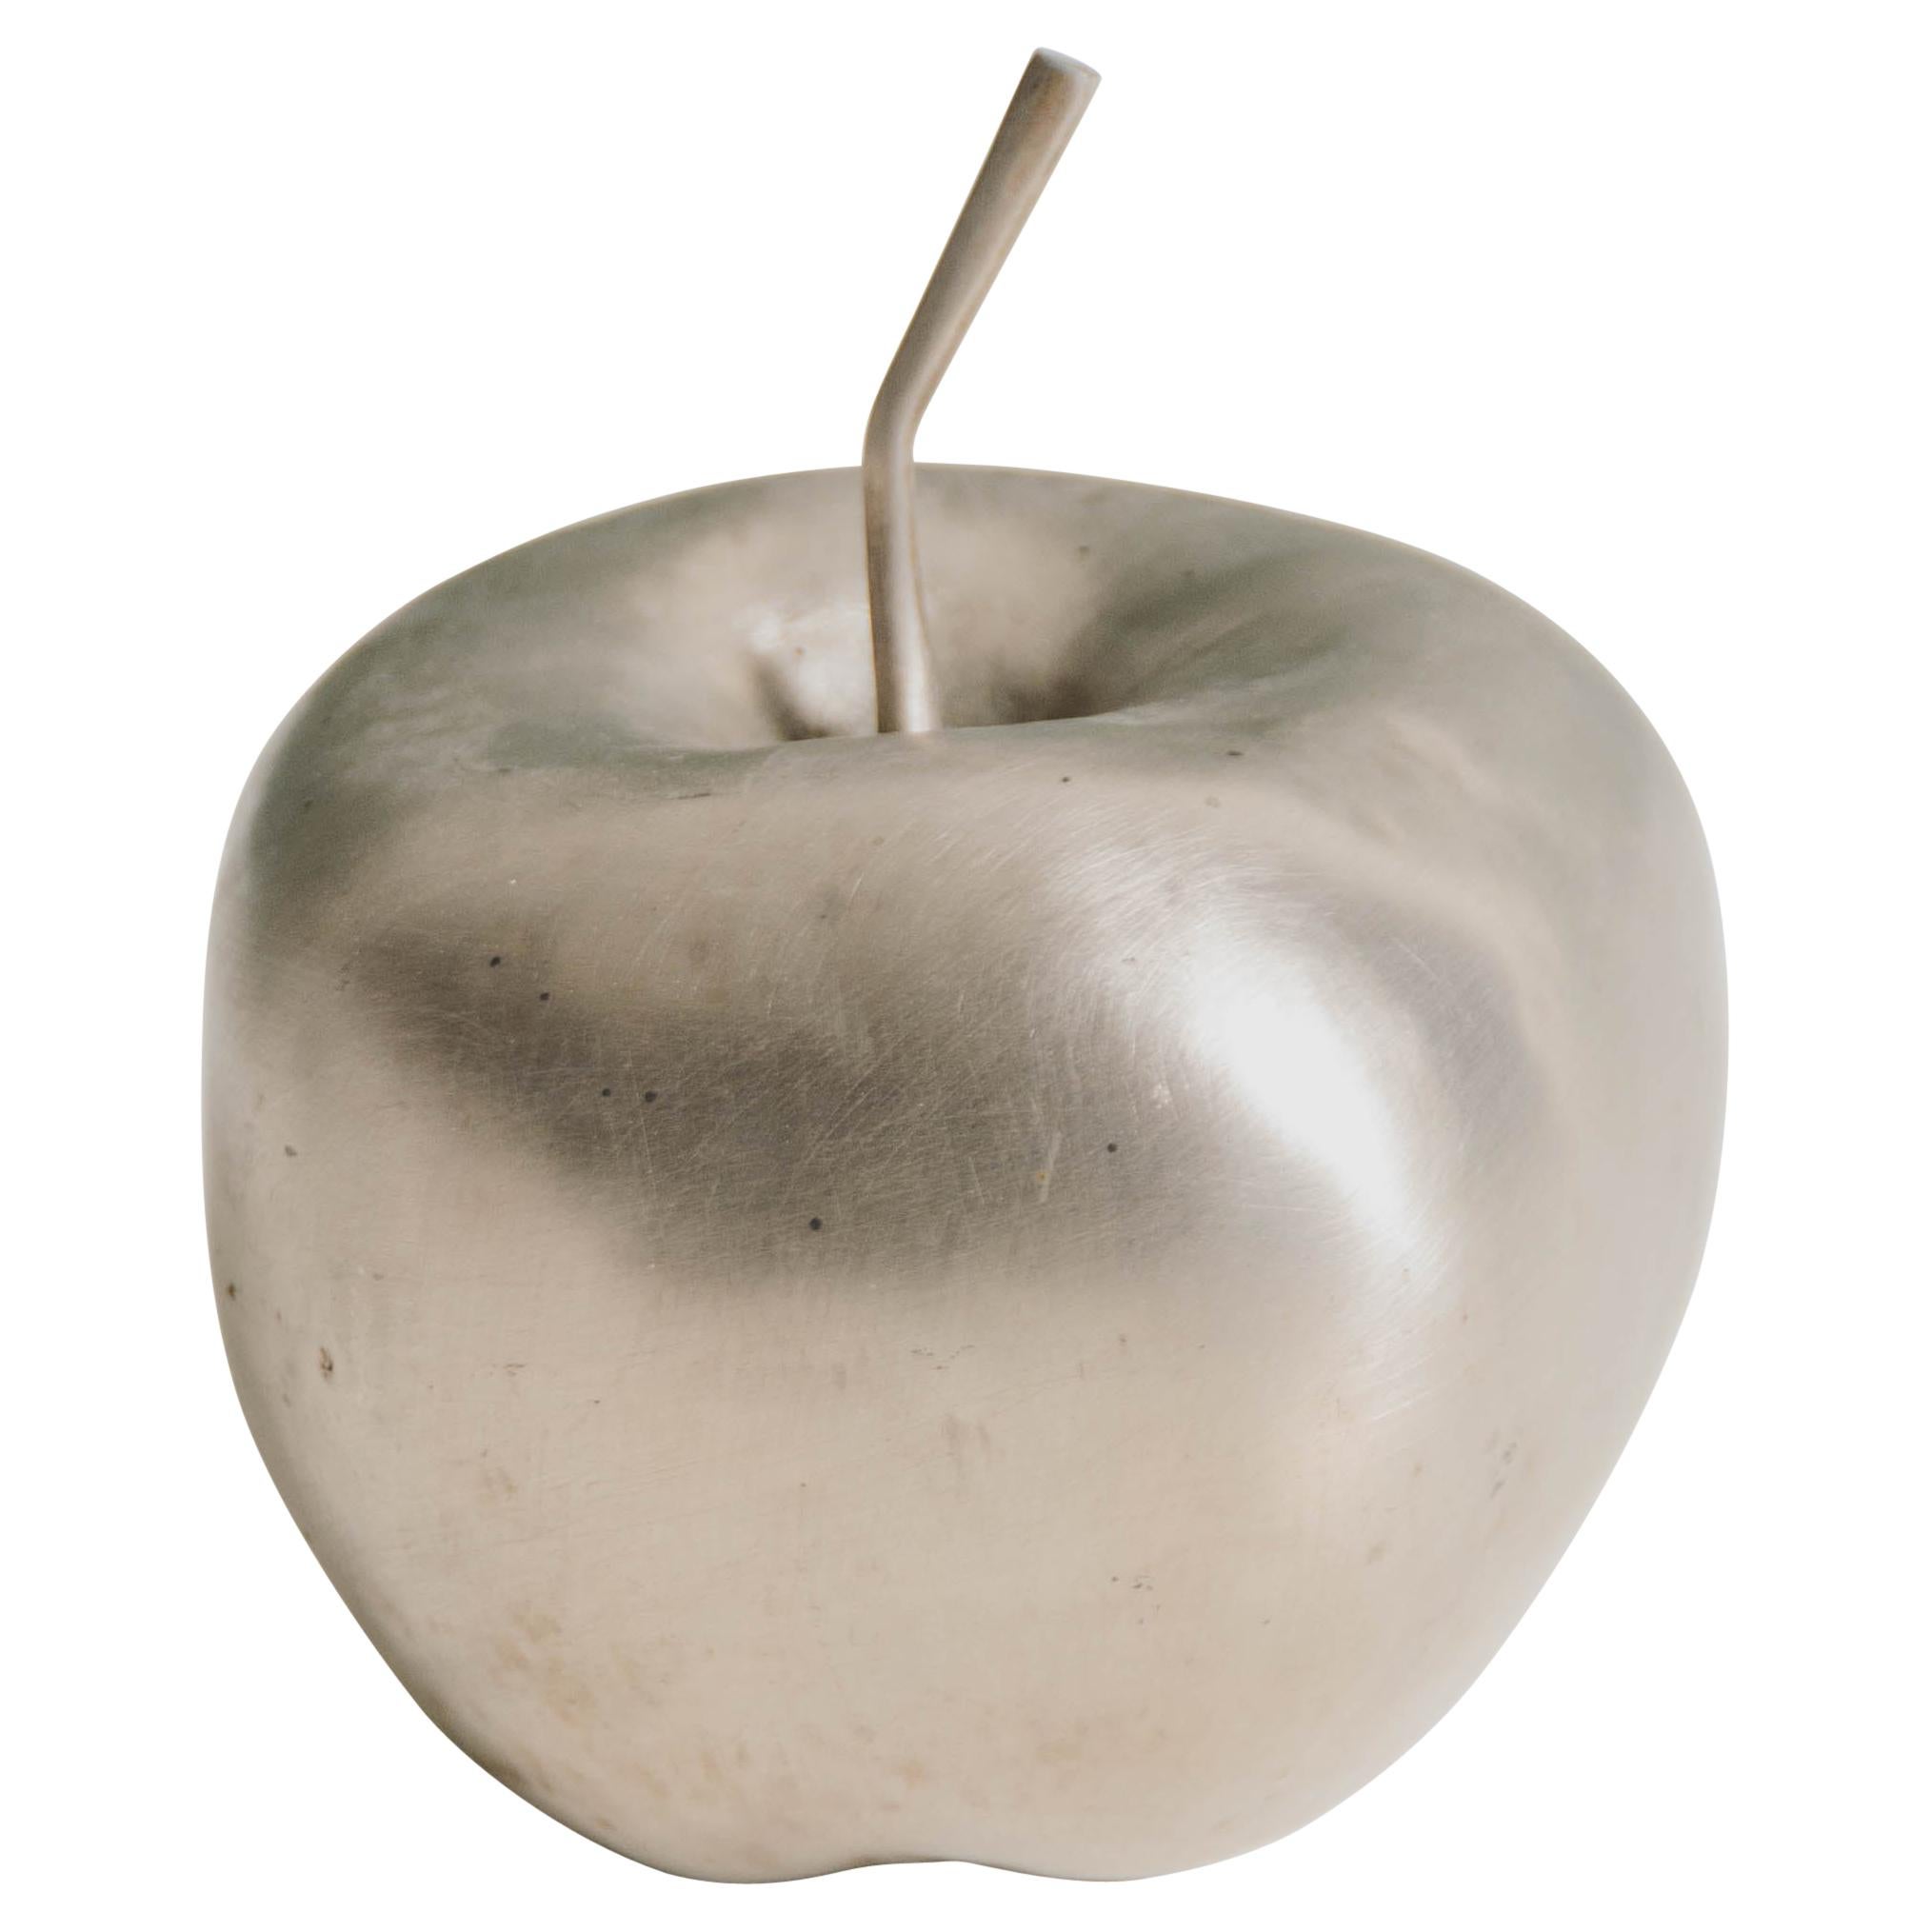 Contemporary Small Apple Sculpture in White Bronze by Robert Kuo